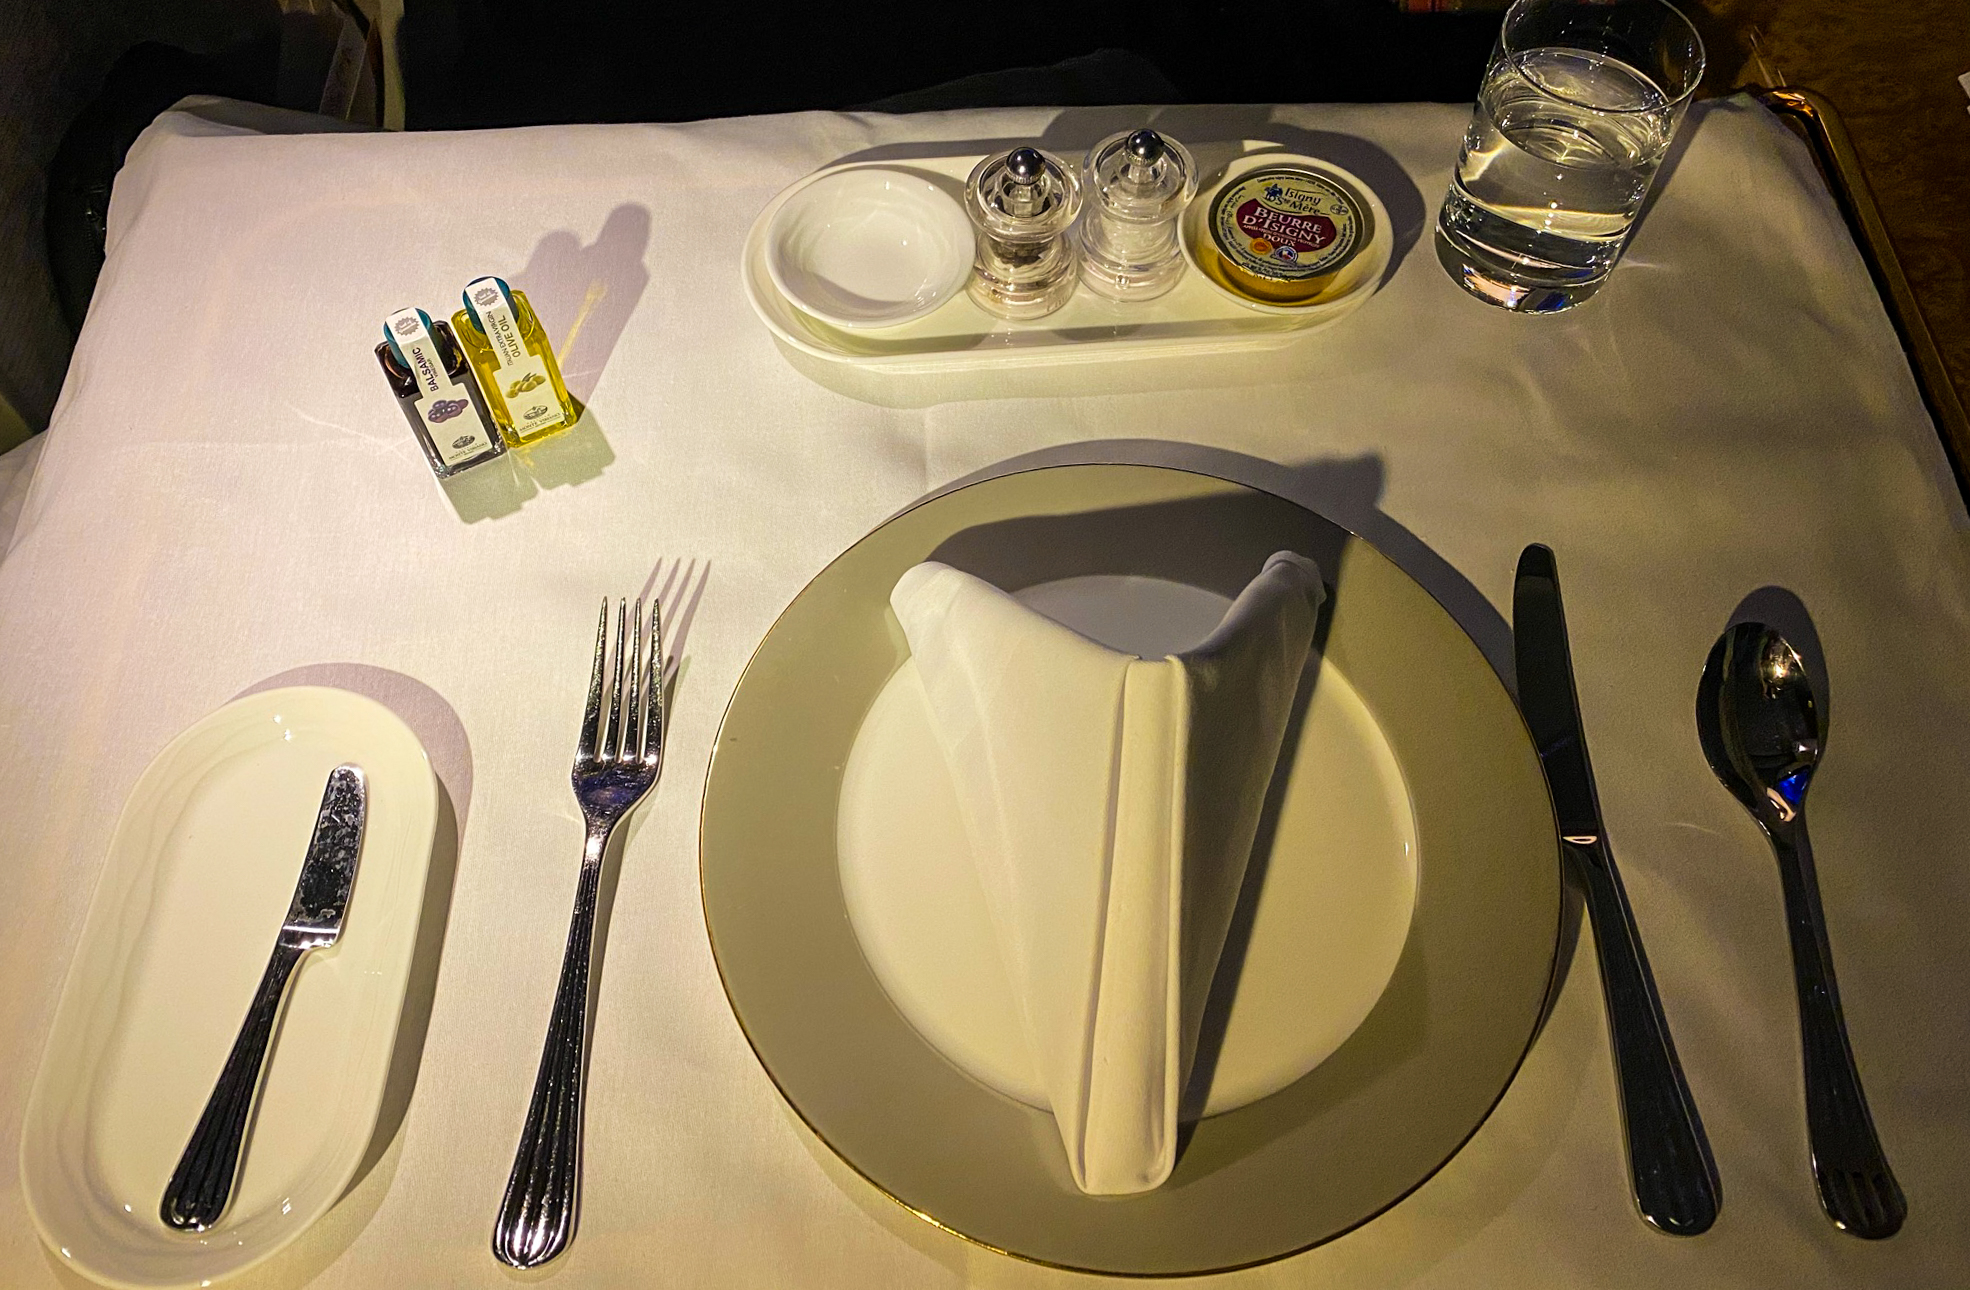 Emirates 777 First Class Table Setting